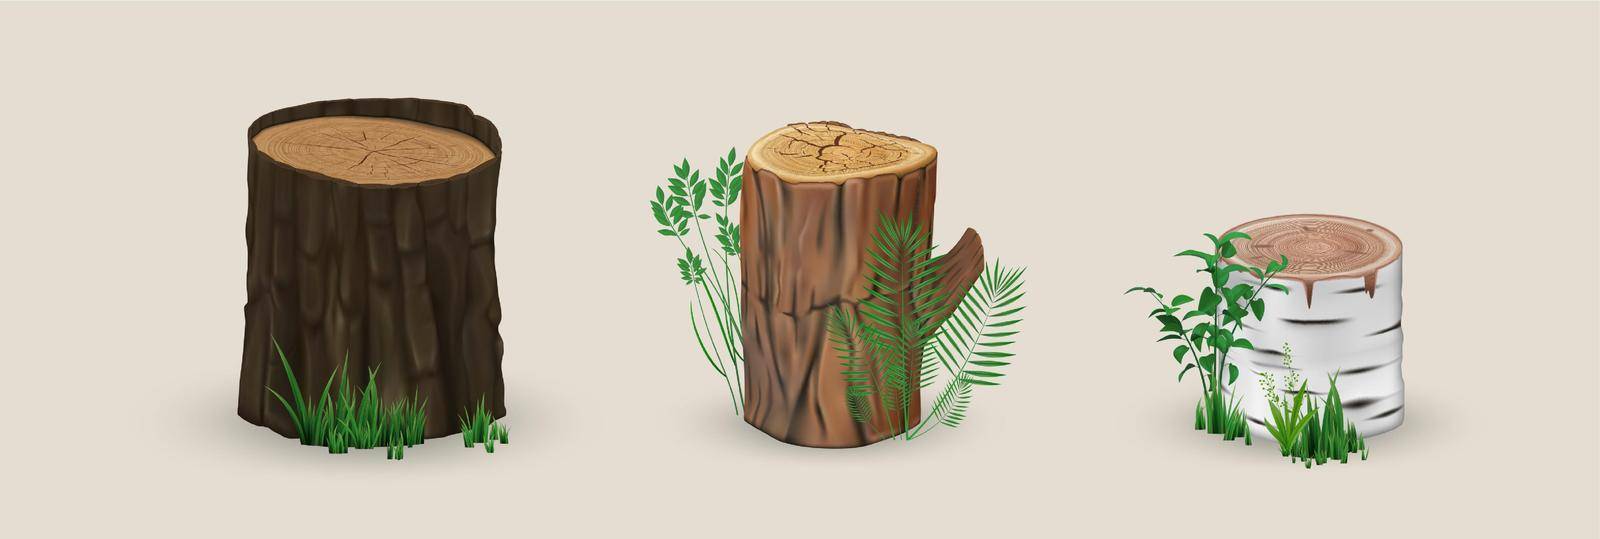 Realistic wood stumps mockup. Collection of realism style drawn wooden cutting and textured planks on white background. Illustration of cracked demolished natural oak birch tree piece of timber.